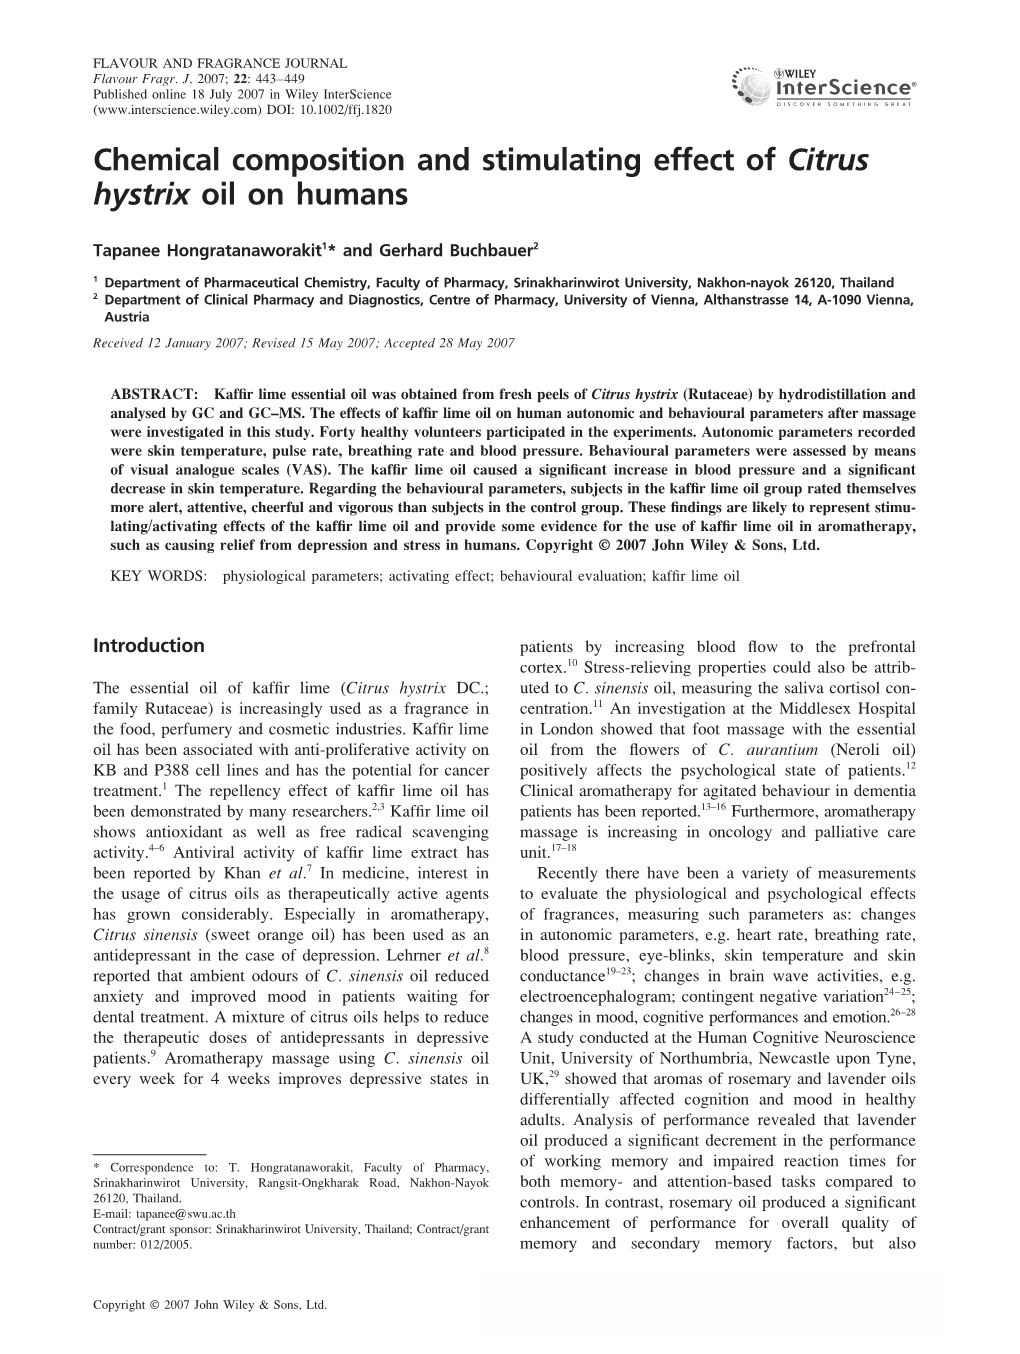 Chemical Composition and Stimulating Effect of Citrus Hystrix Oil on Humans